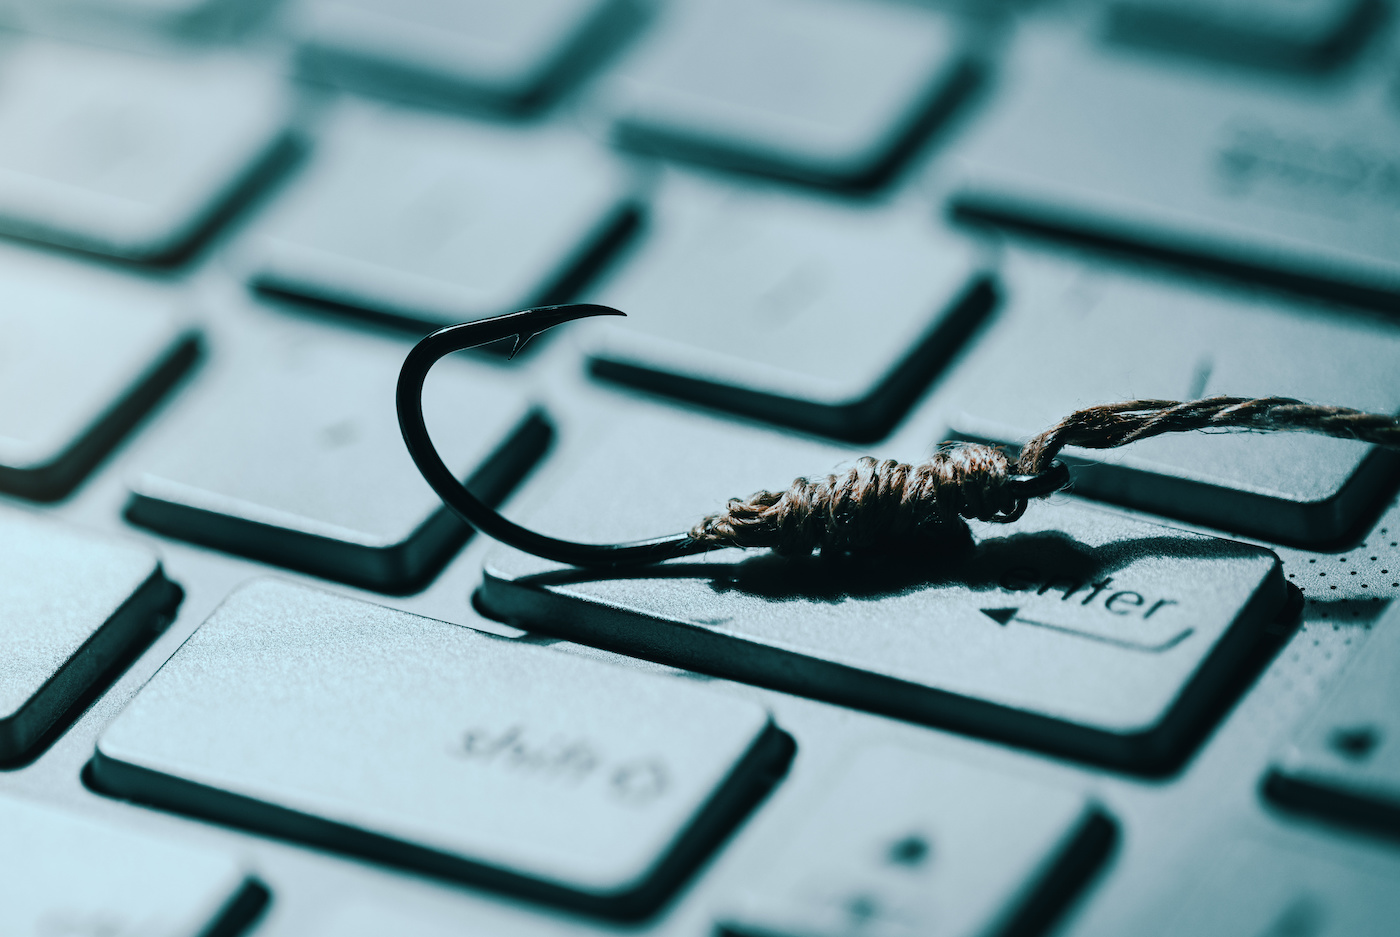 spear-phishing-vs-phishing:-how-to-tell-the-difference-in-a-cloud-infrastructure